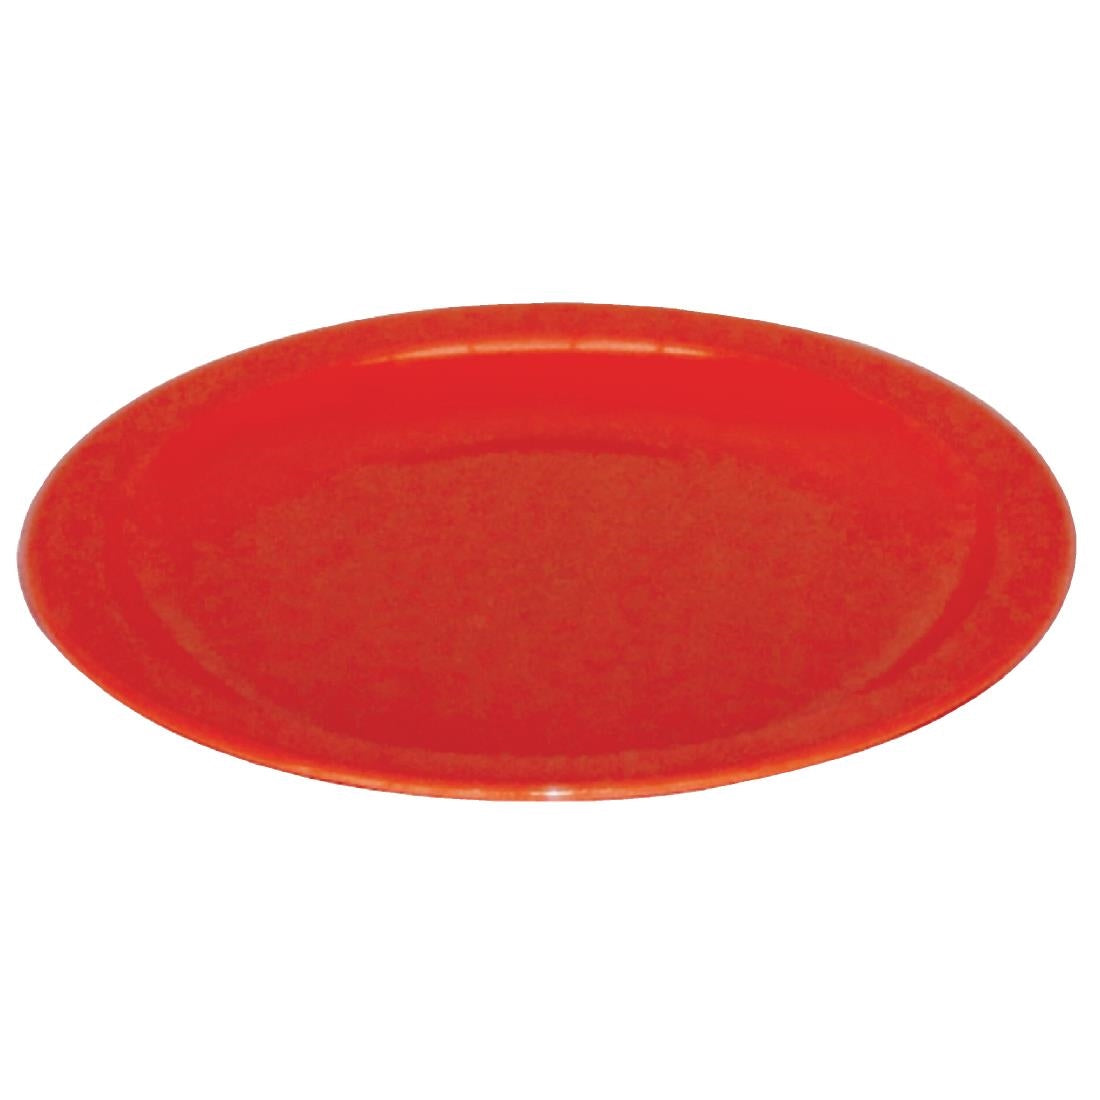 CB770 Olympia Kristallon Polycarbonate Plates Red 230mm (Pack of 12)